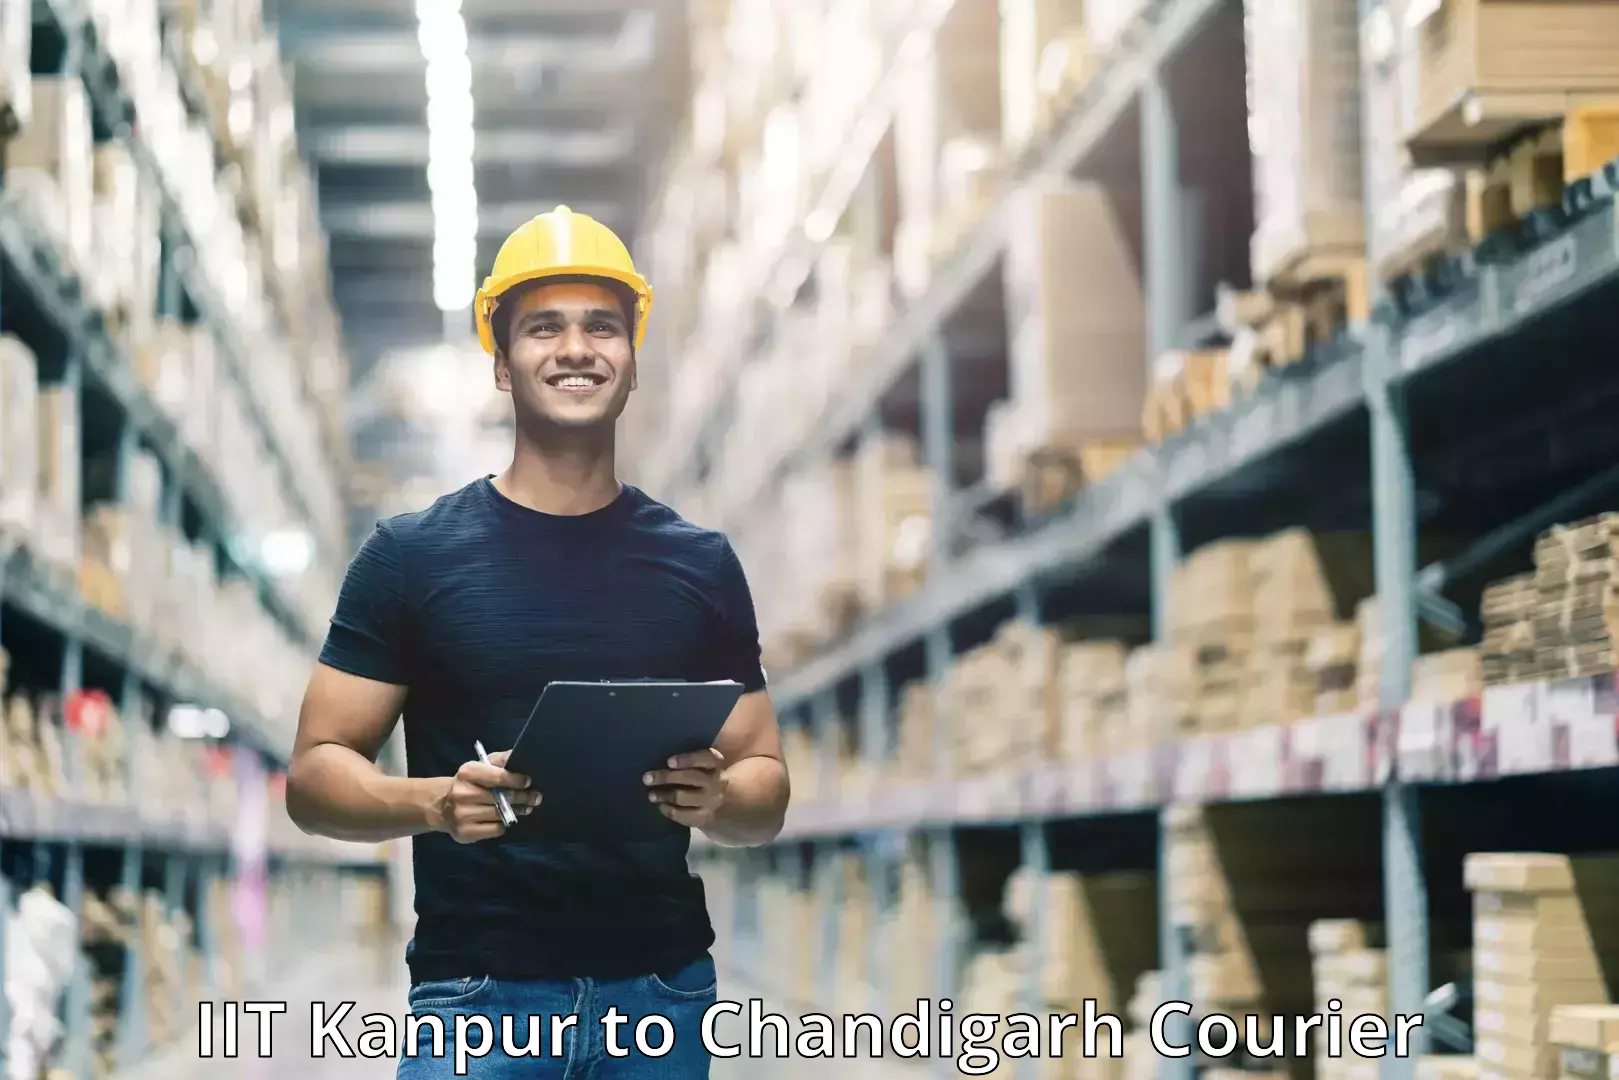 Customer-focused courier IIT Kanpur to Chandigarh